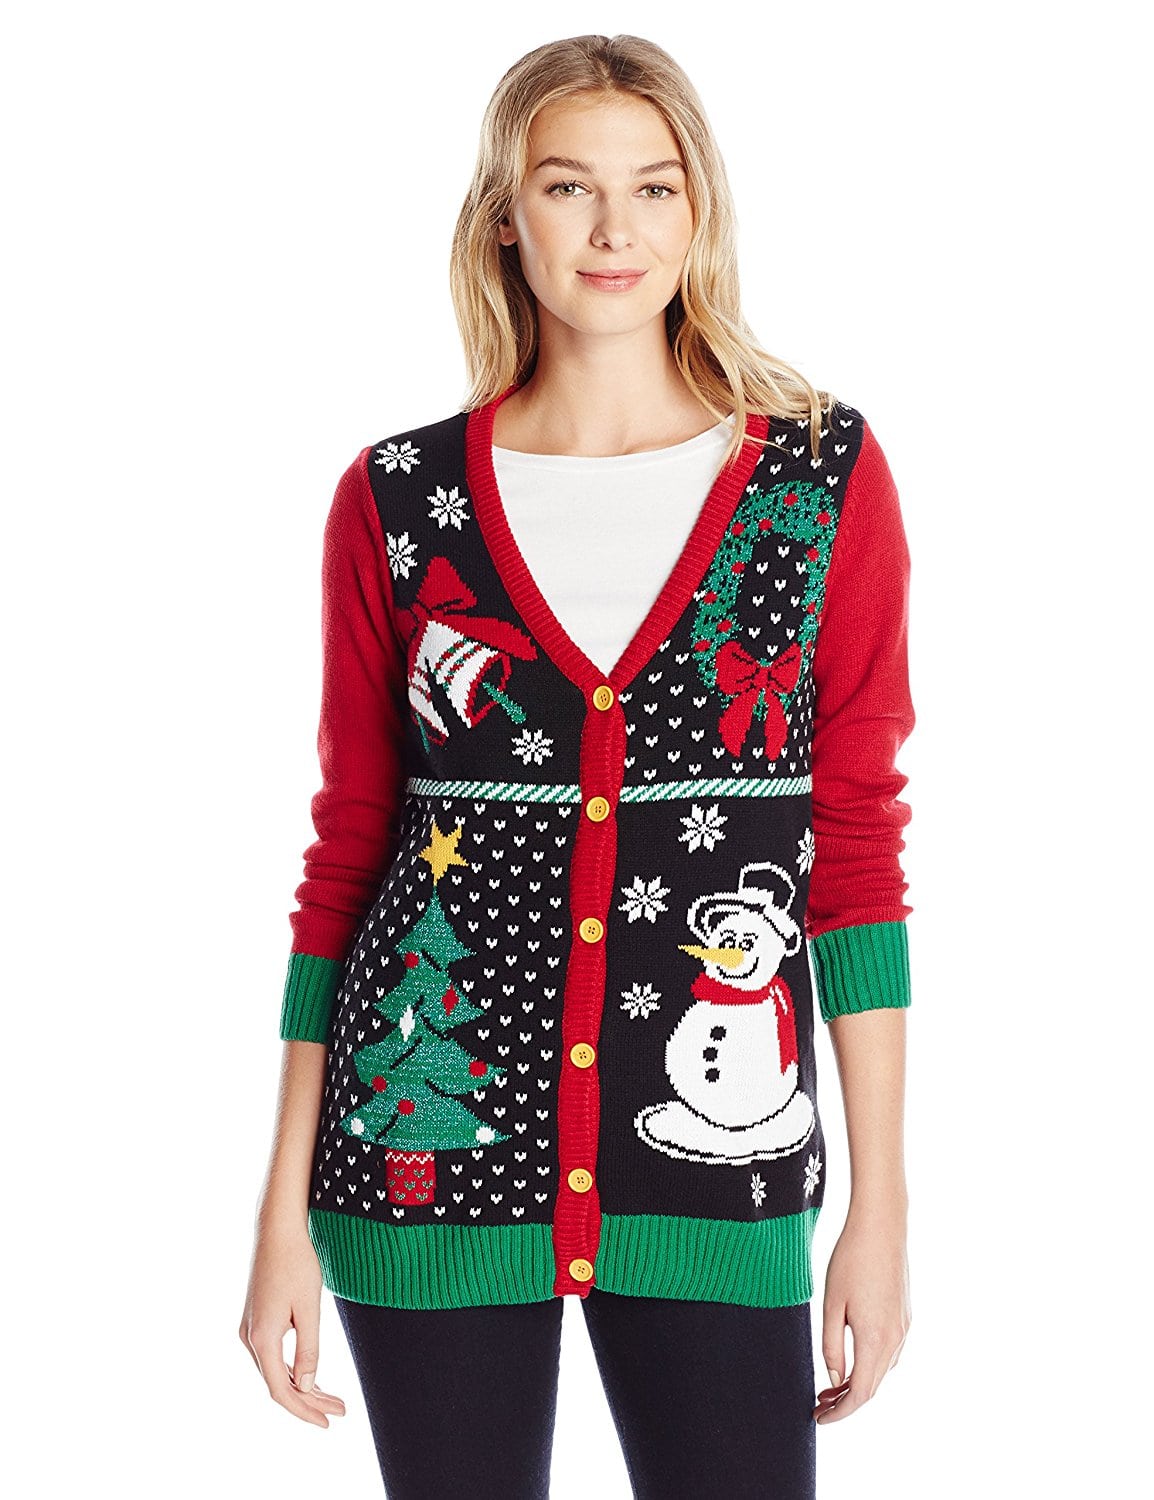 Top 6 Women's Ugly Christmas Sweater Recommendations This Season